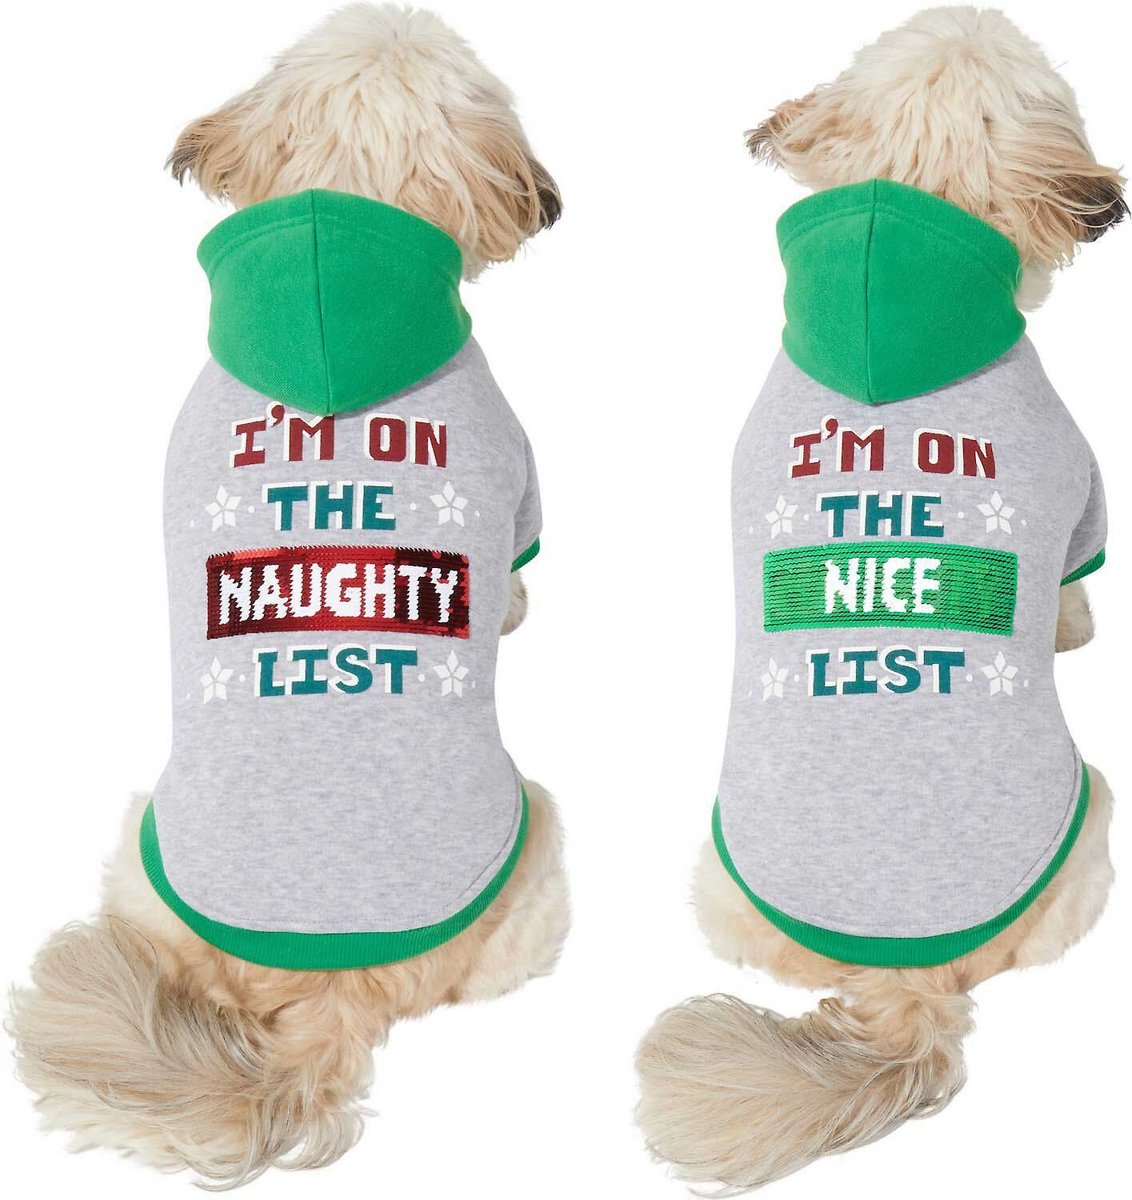 1701694565 560 10 best pet gifts that dogs and cats will love